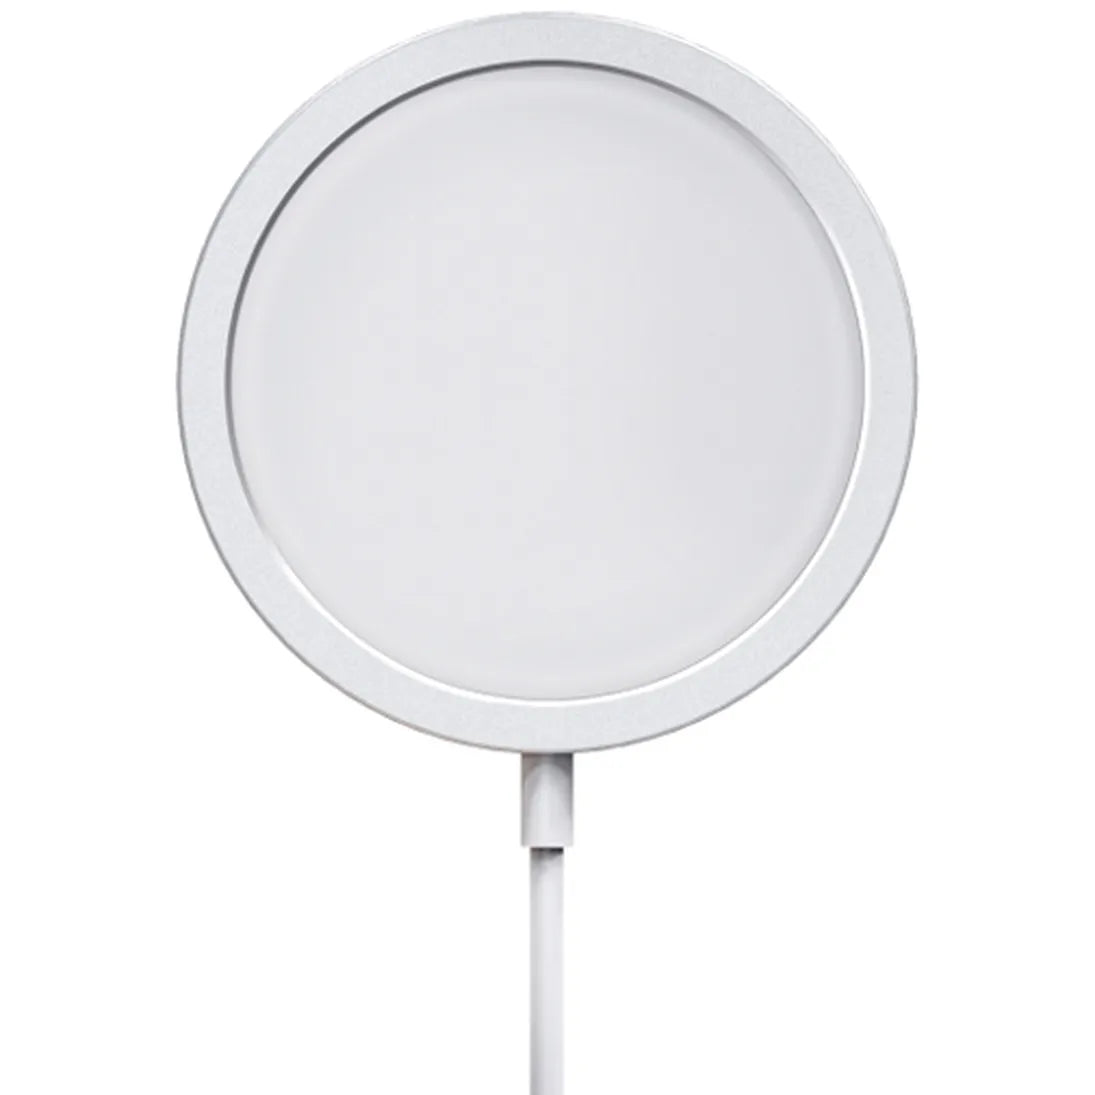 Mobilize MagSafe Caricabatterie rapido wireless Bianco